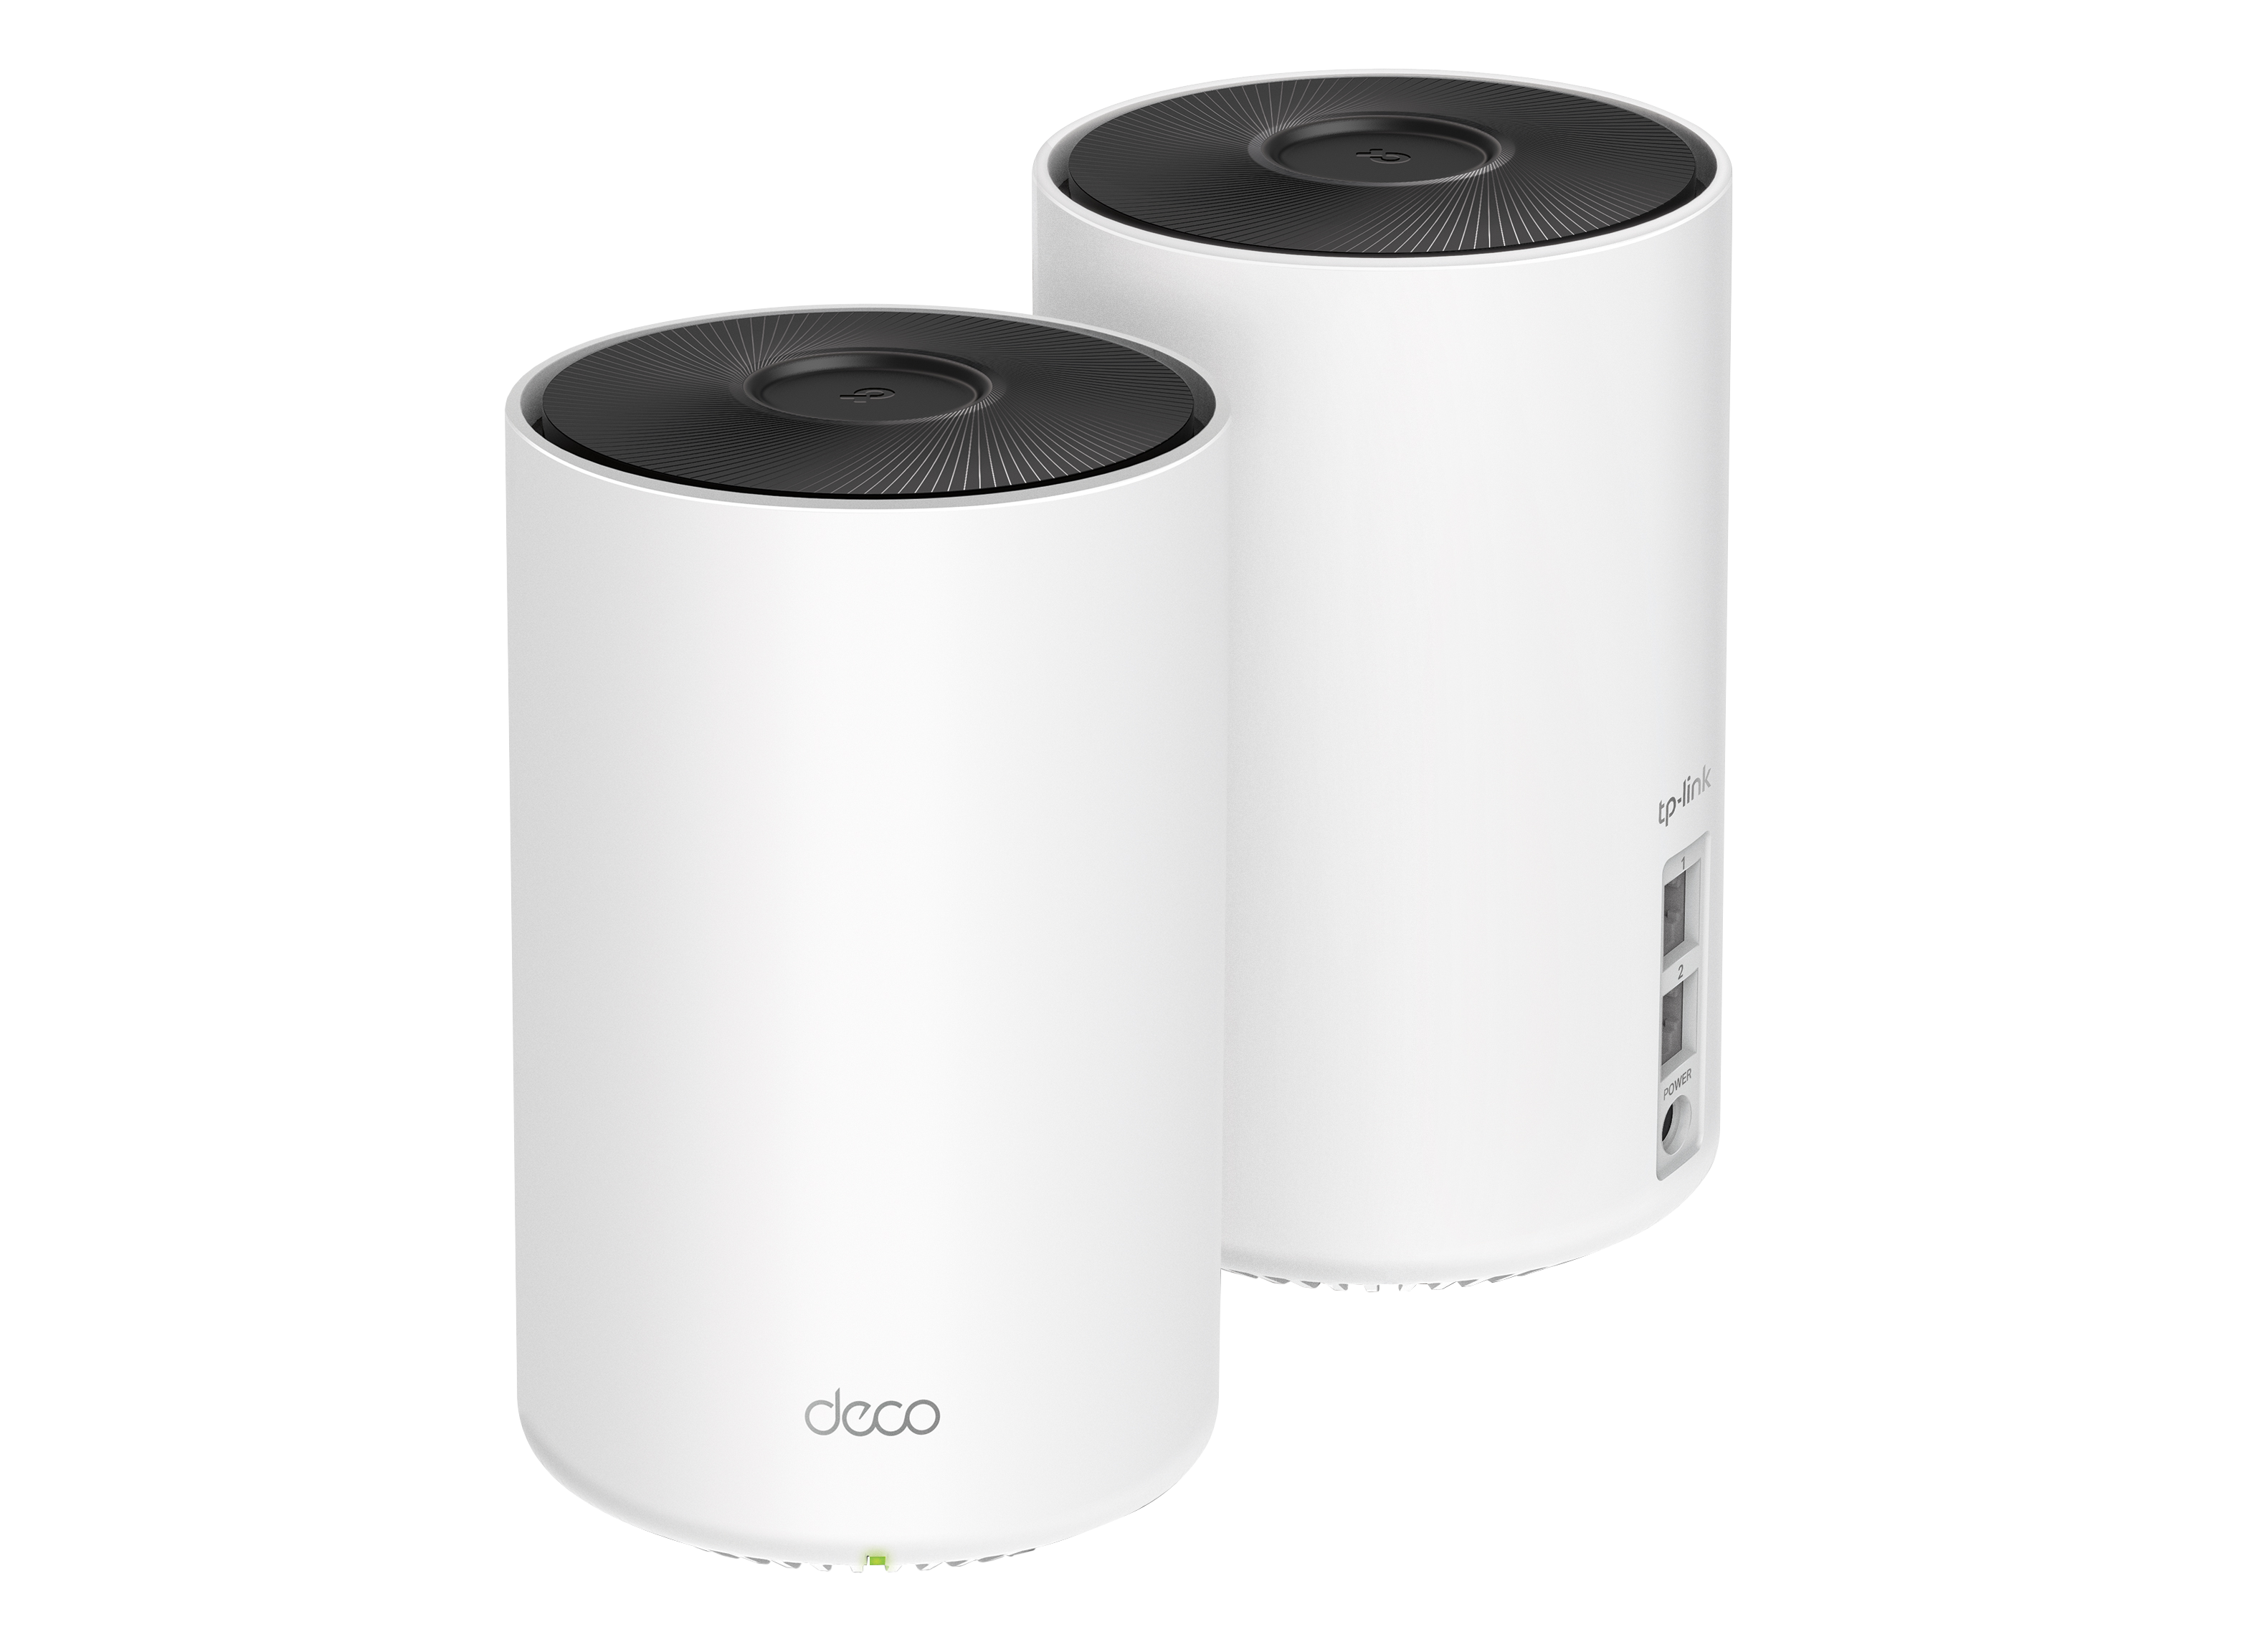 TP-Link Deco W7200 AX3600 (2-pack) Wireless Router Review